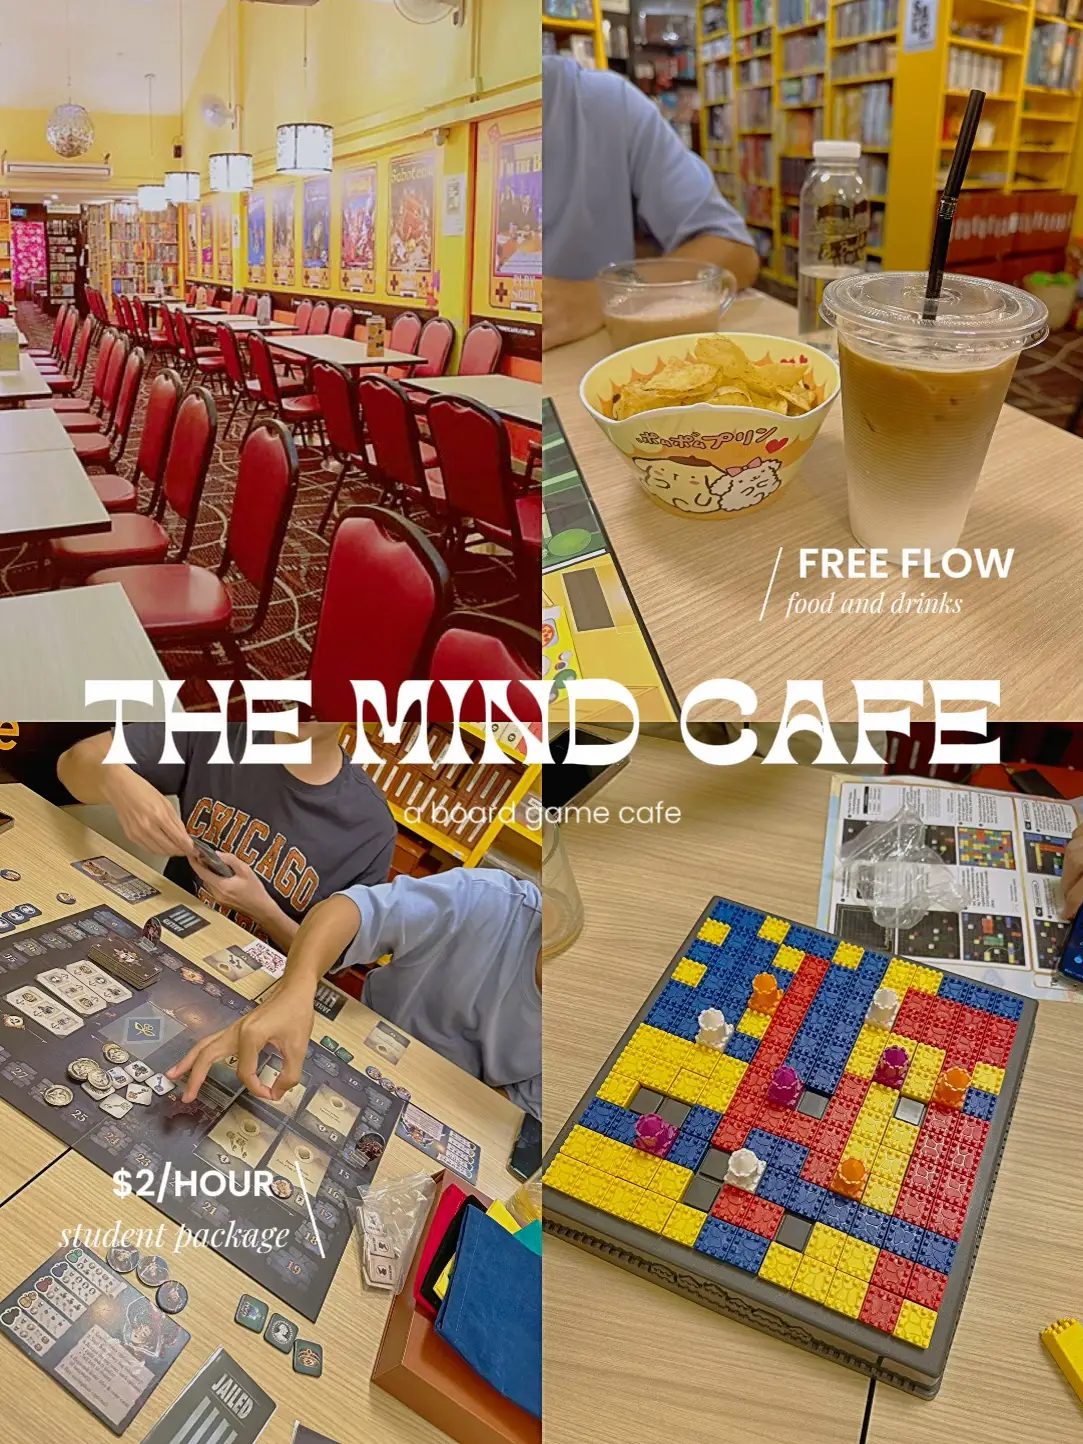 board game cafe | $2/hr with free flow snacks 🤤🍟's images(0)